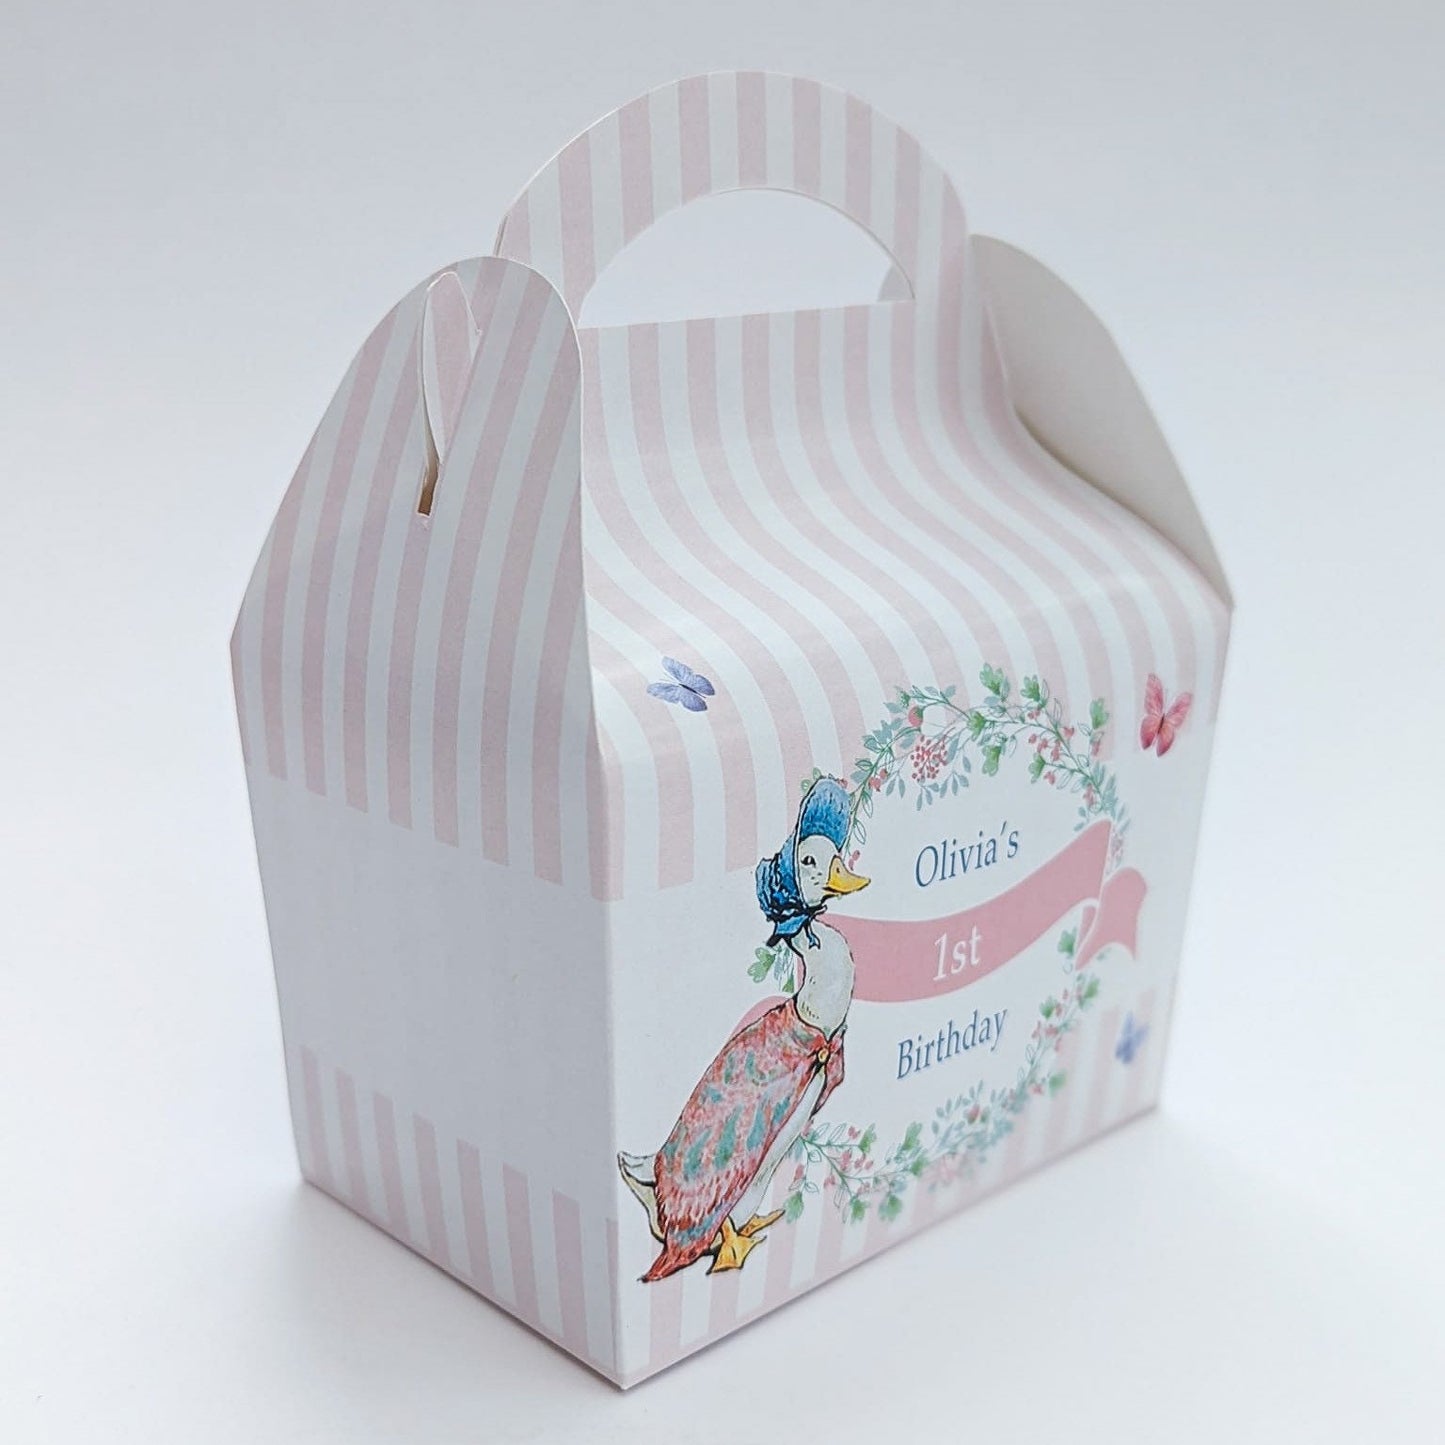 Jemima Puddleduck Peter Rabbit Personalised Children’s Party Box Gift Bag Favour